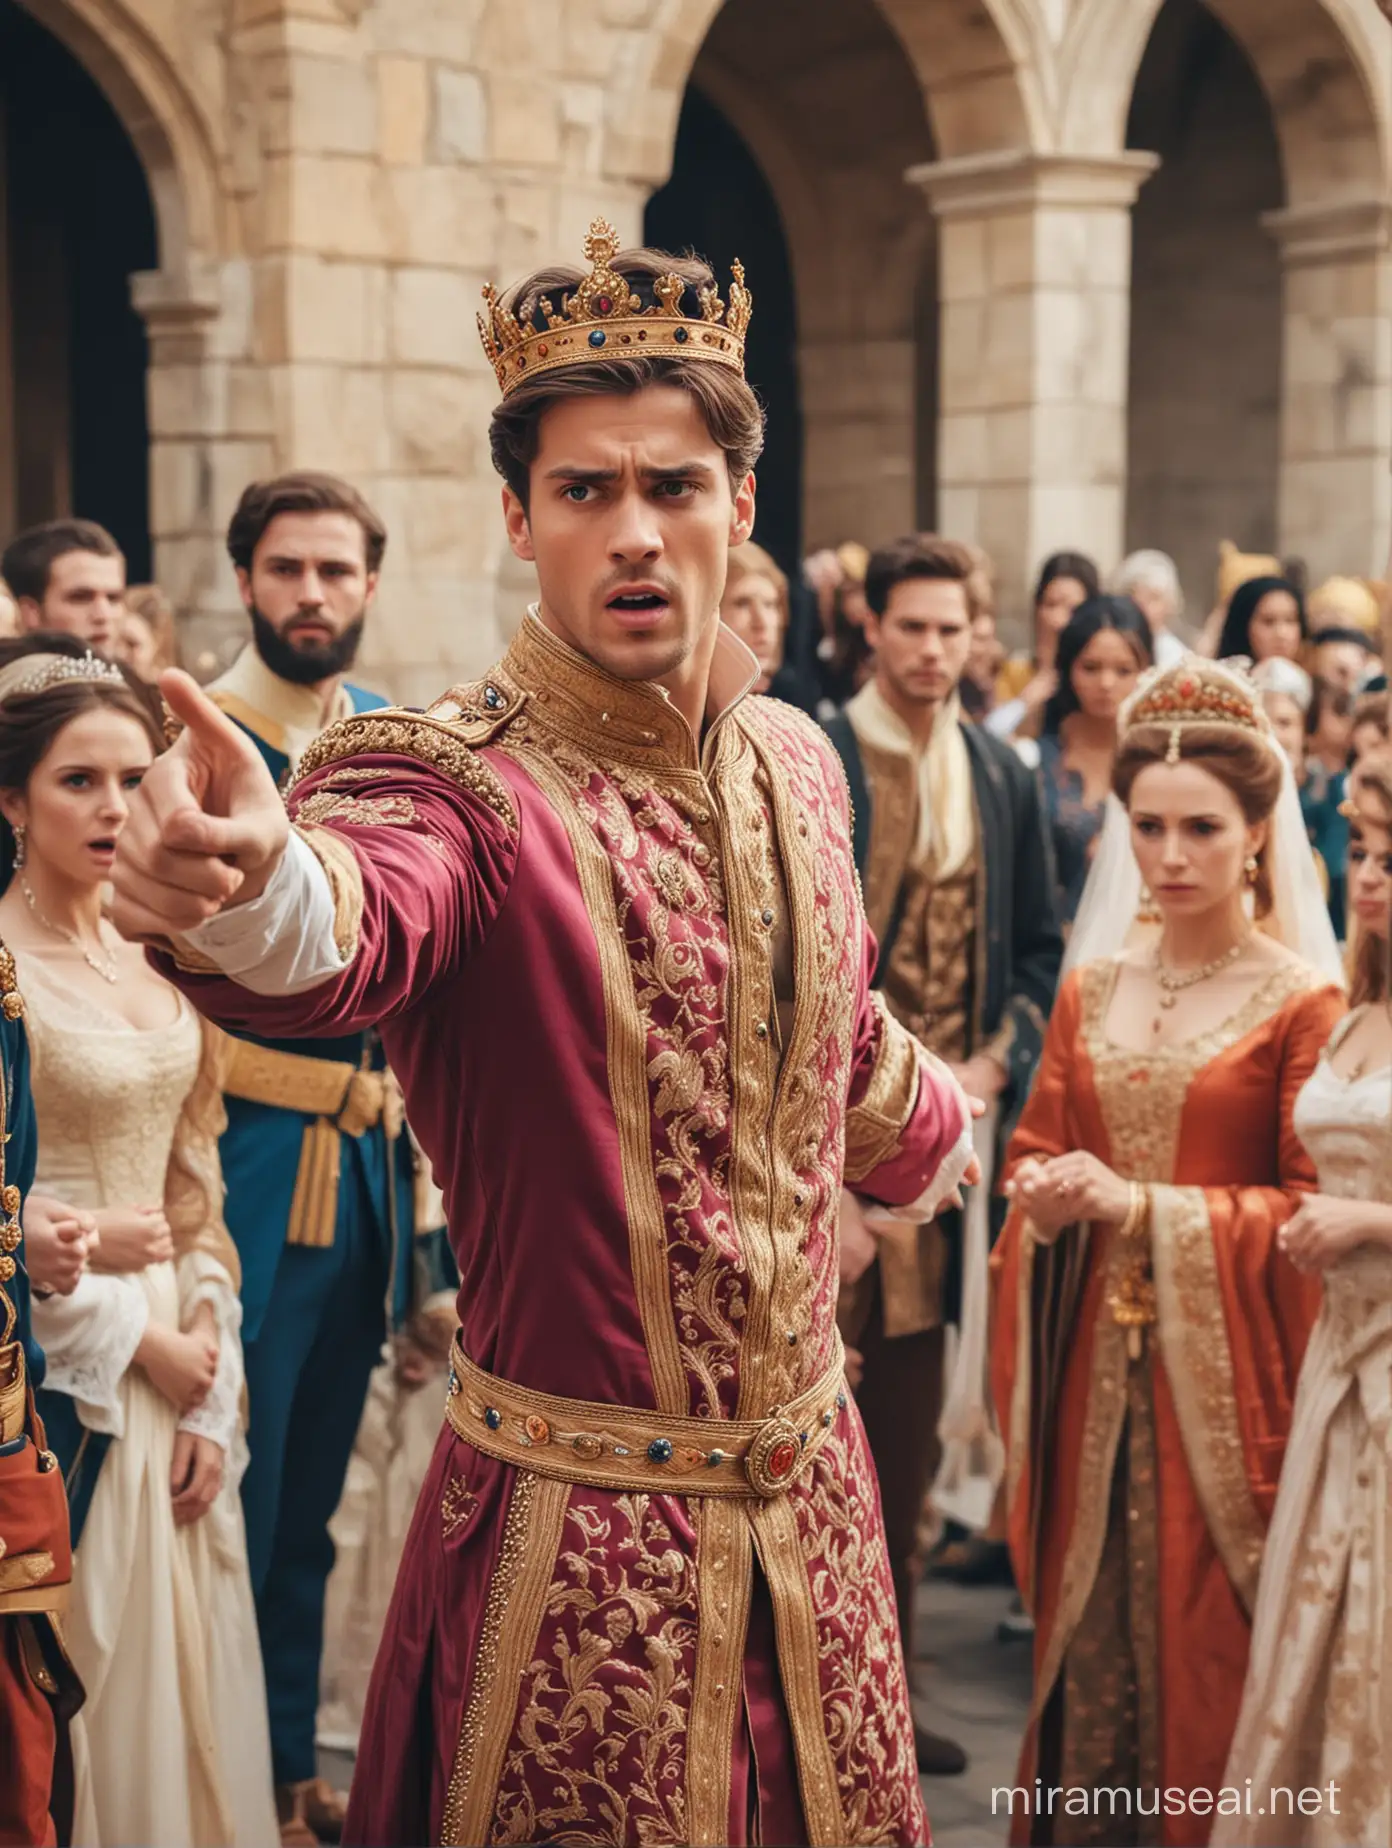 A handsome young man in a royal apparel pointing angrily at someone, with people around him and his scared wife